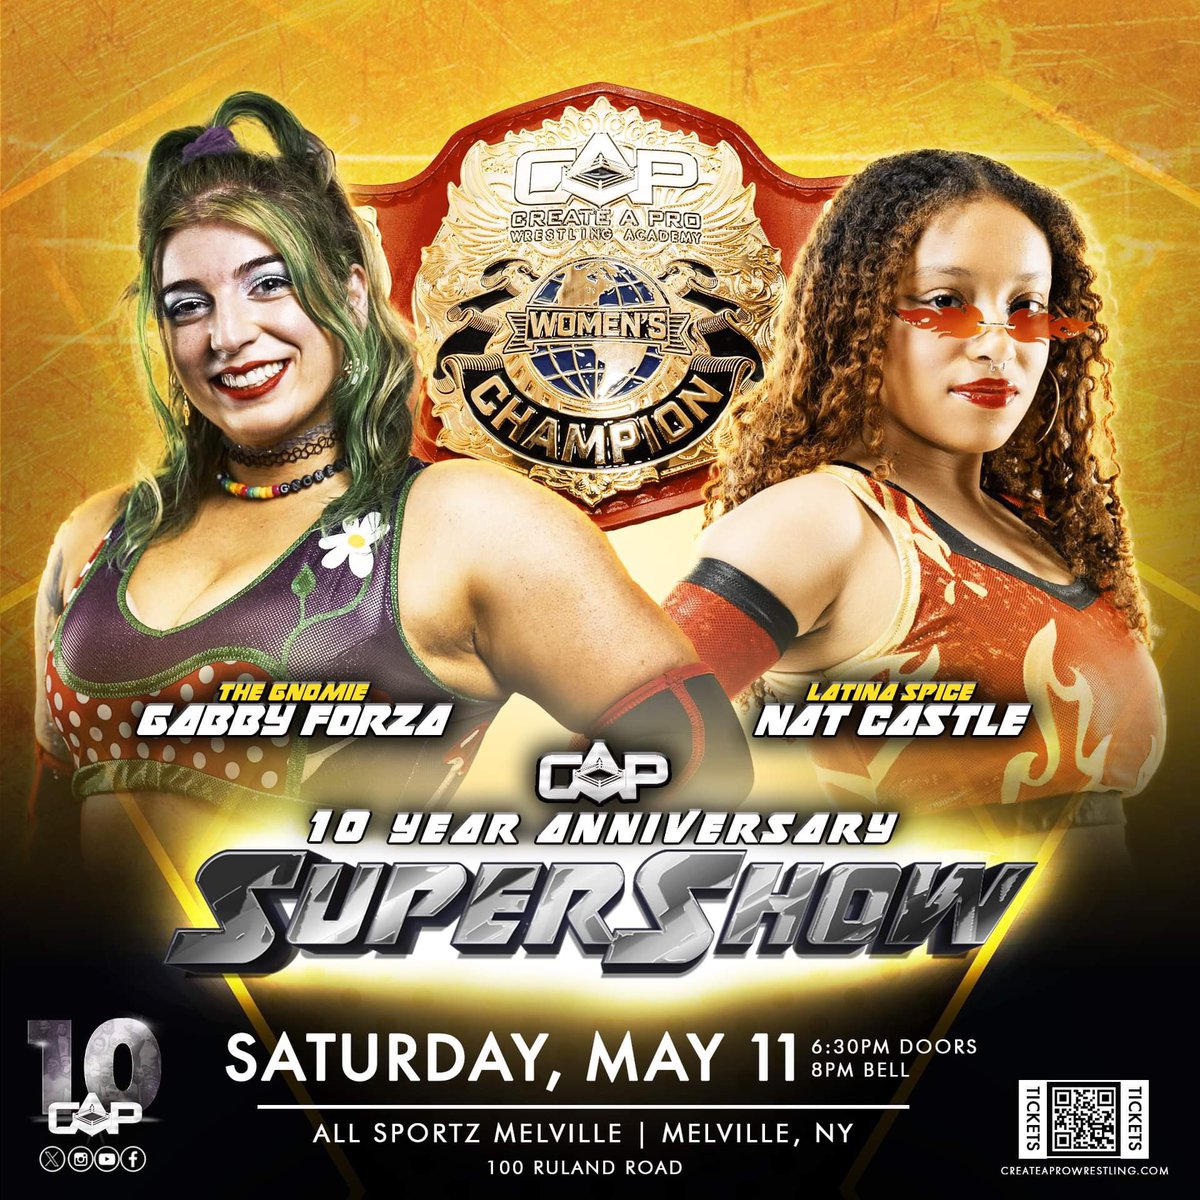 🚨MATCH ANNOUNCEMENT🚨 History will be made! The Create A Pro Women’s Championship Tournament Finals will take place on 5/11 as Gabby Forza goes 1 on 1 with Nat Castle Who will become the first ever CAP Women’s Champion? #CAP10 🎟GET YOUR TICKETS NOW🎟 eventbrite.com/e/create-a-pro…